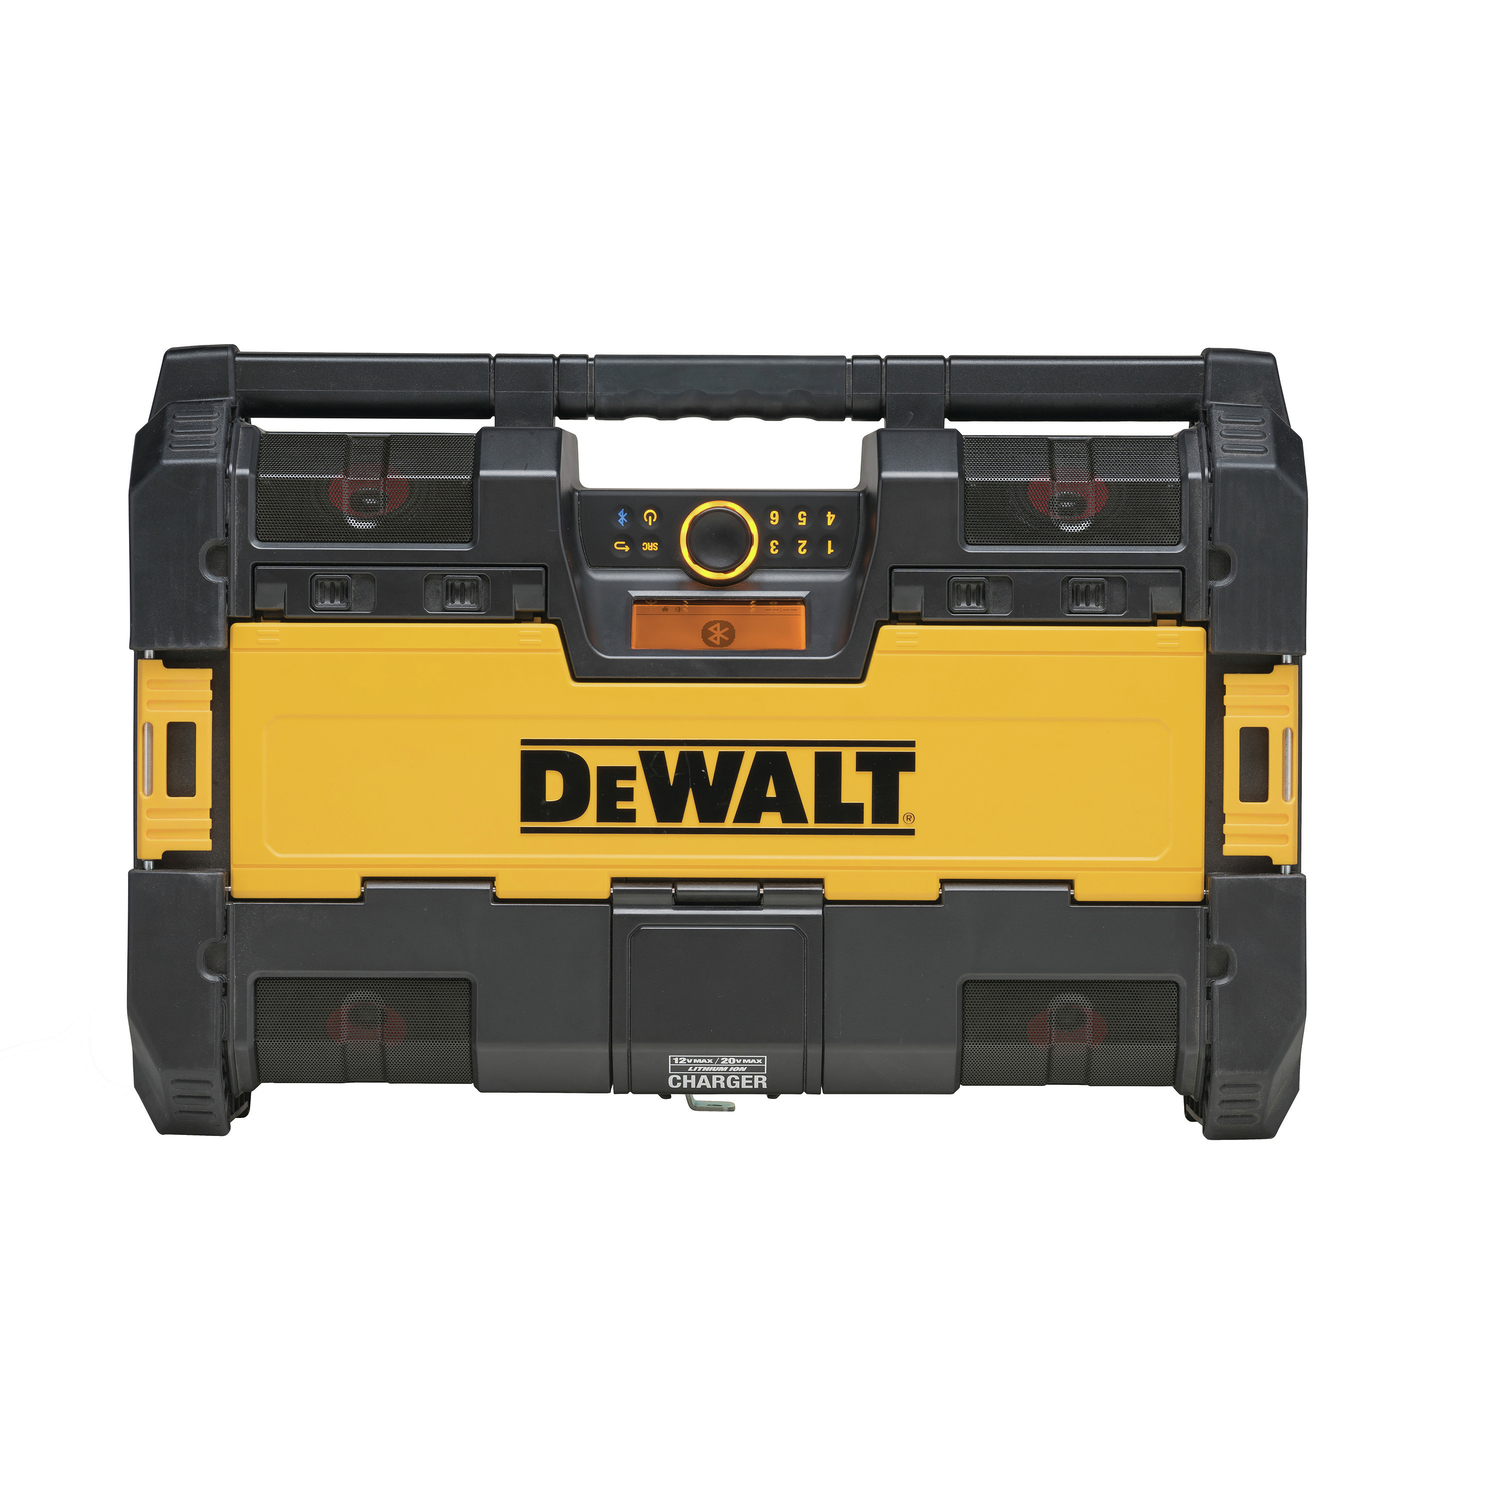 Photos - Battery Charger DeWALT ToughSystem 20 V Lithium-Ion Worksite Radio and Charger 1 pc DWST08 